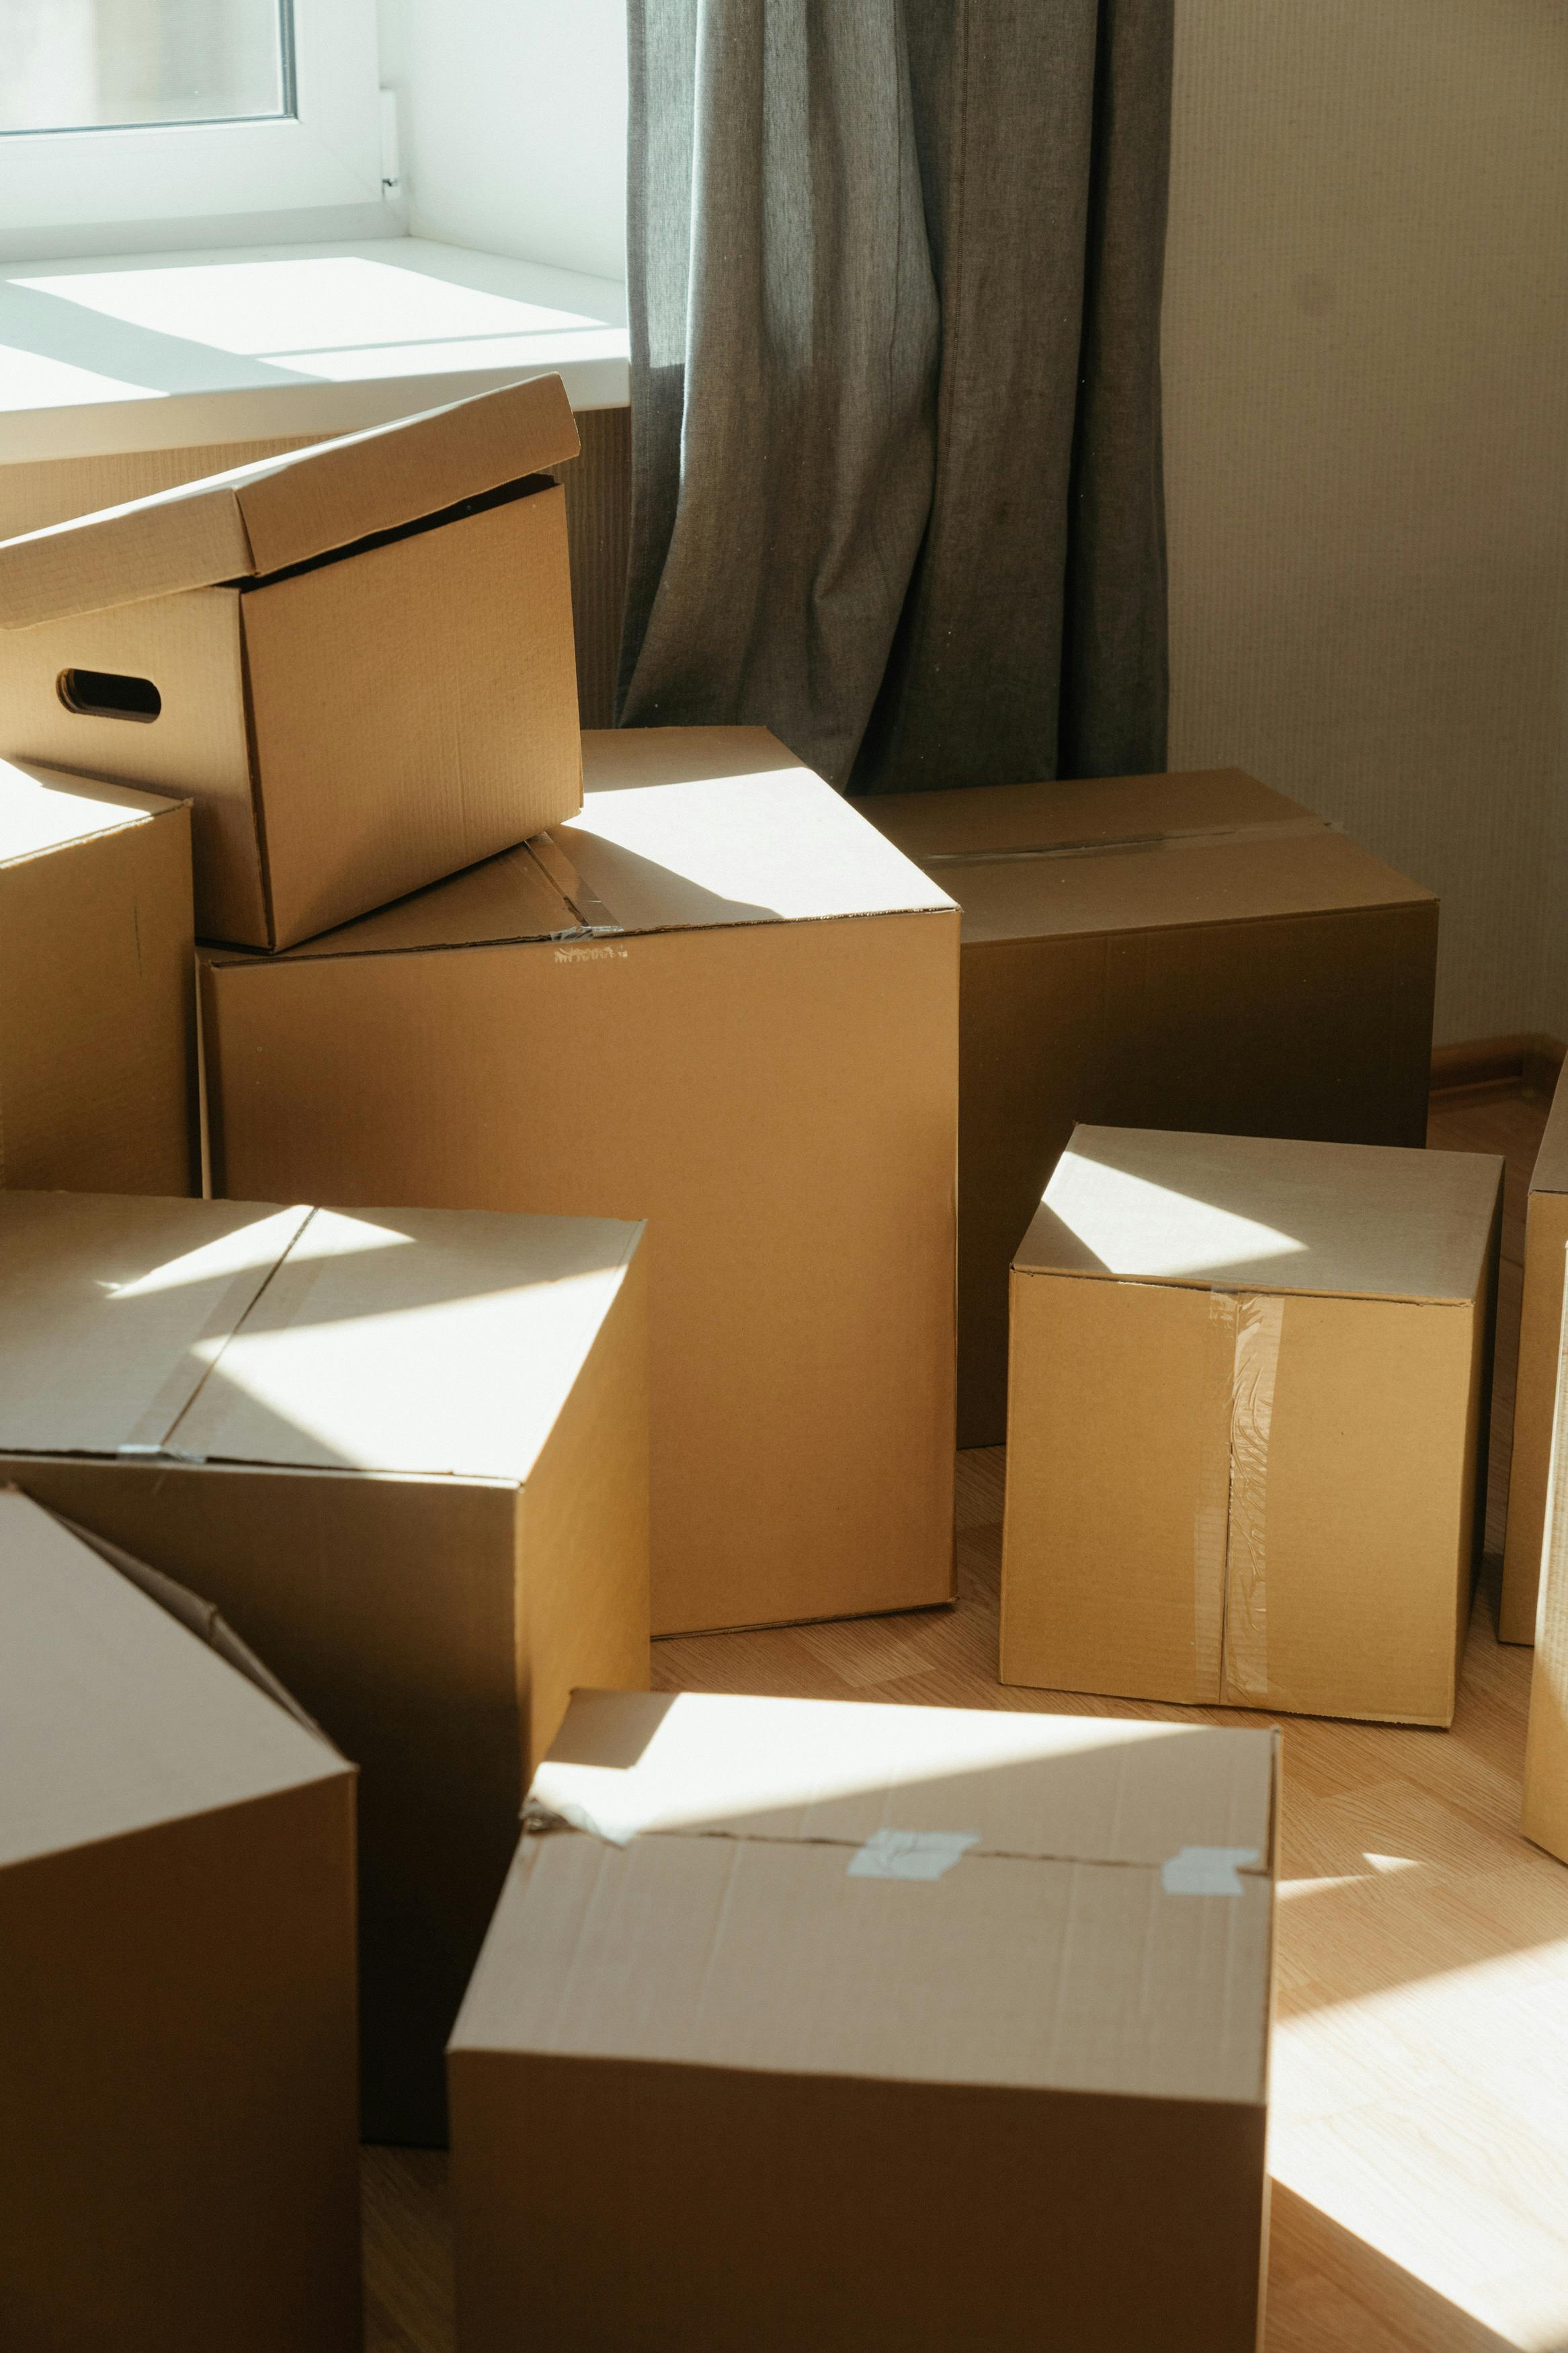 Three Cardboard Boxes Stock Photo - Download Image Now